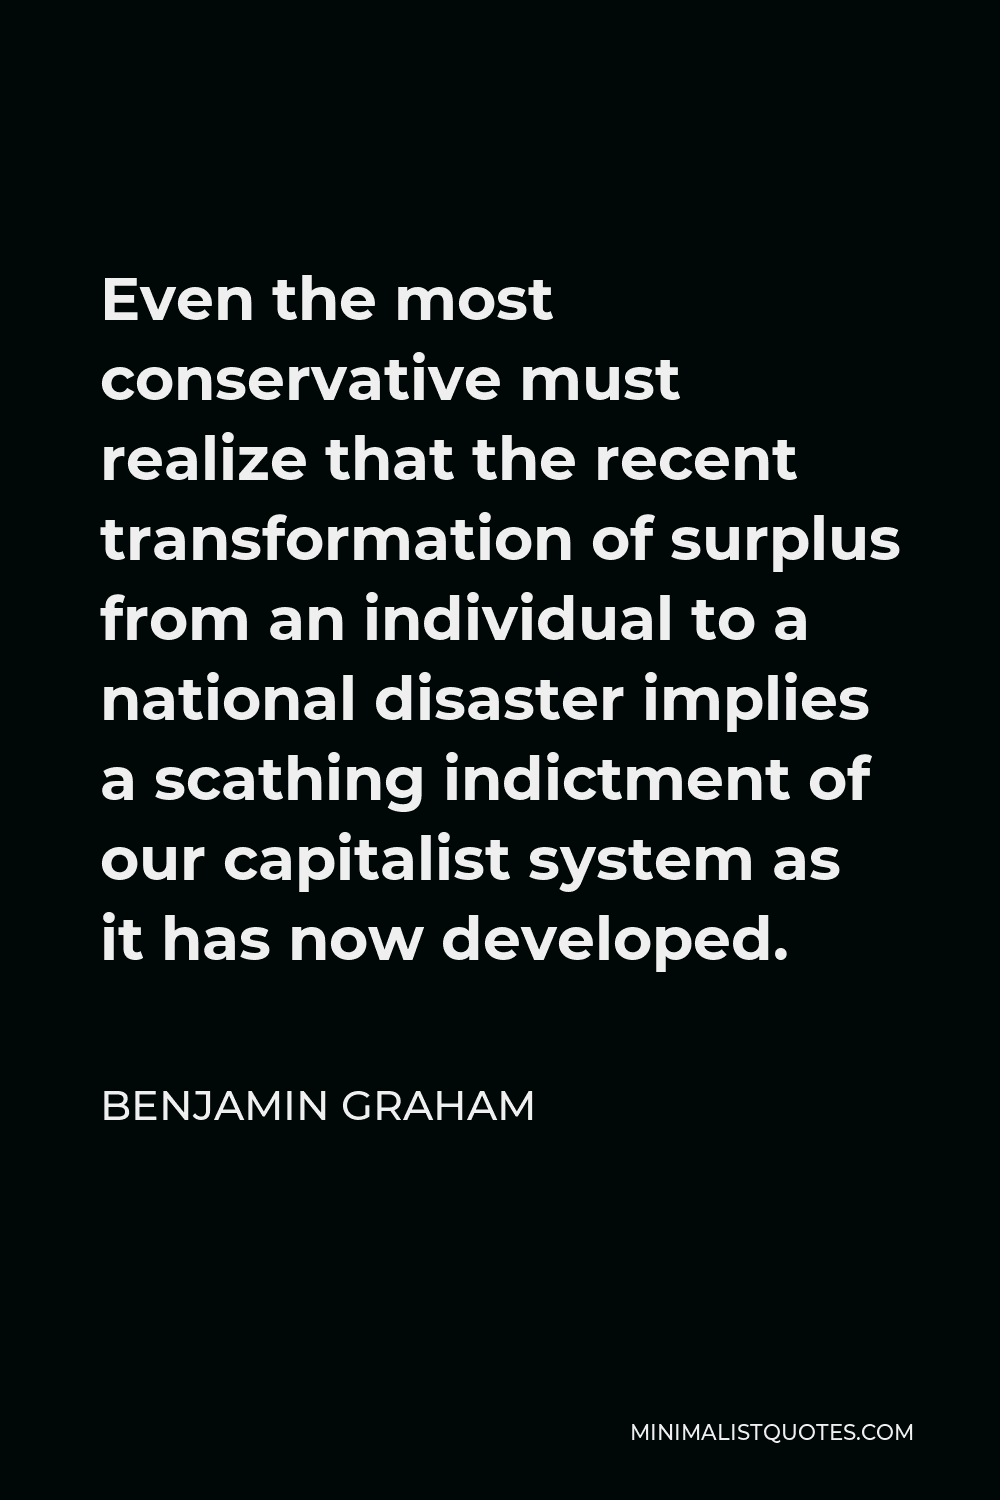 Benjamin Graham Quote - Even the most conservative must realize that the recent transformation of surplus from an individual to a national disaster implies a scathing indictment of our capitalist system as it has now developed.